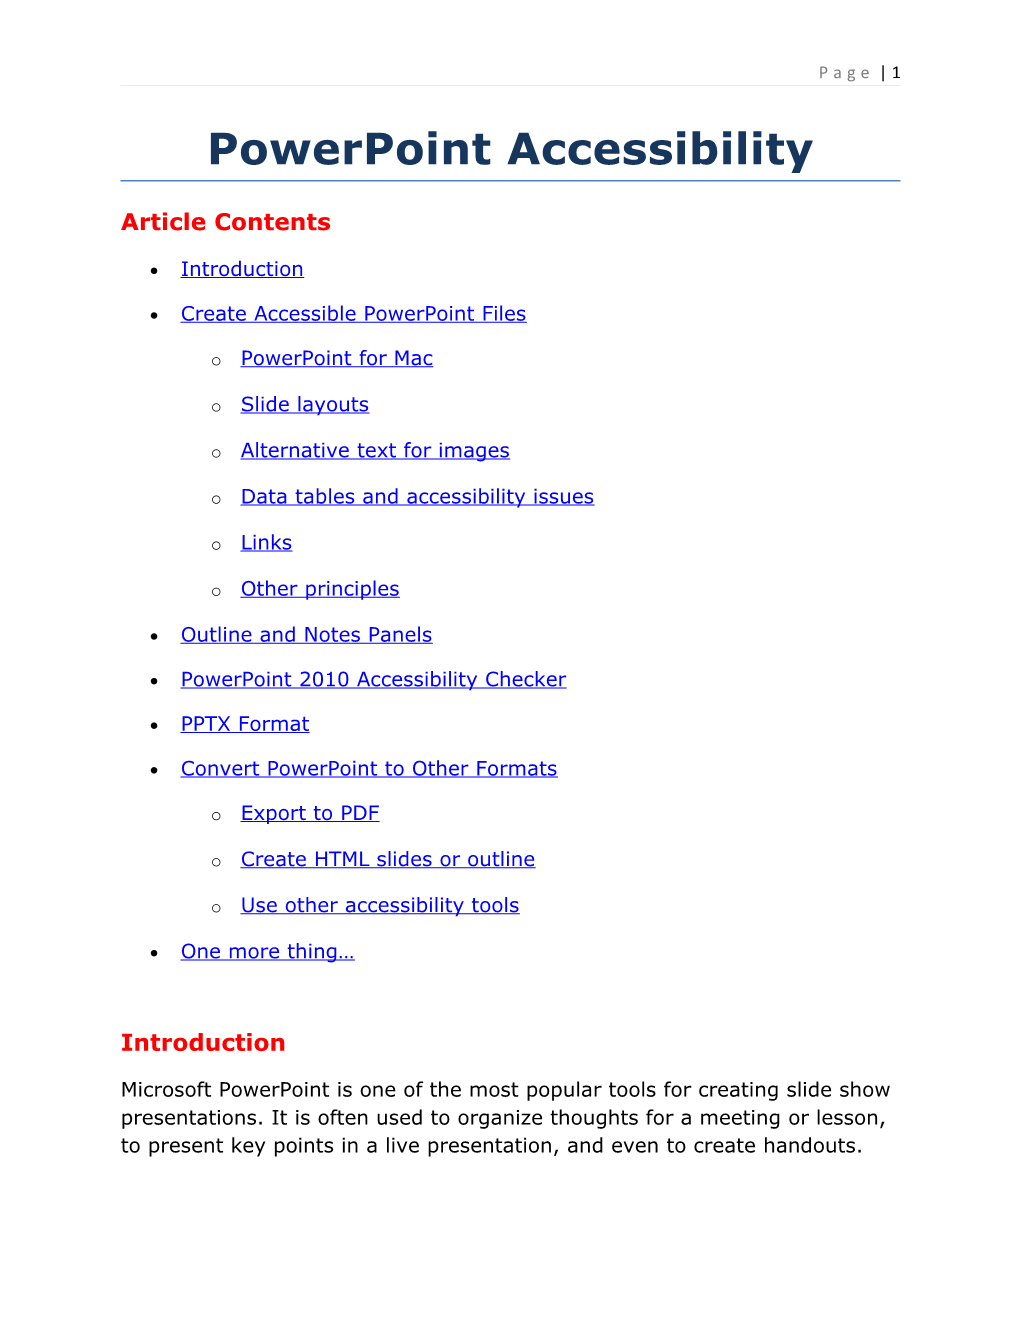 Powerpoint Accessibility